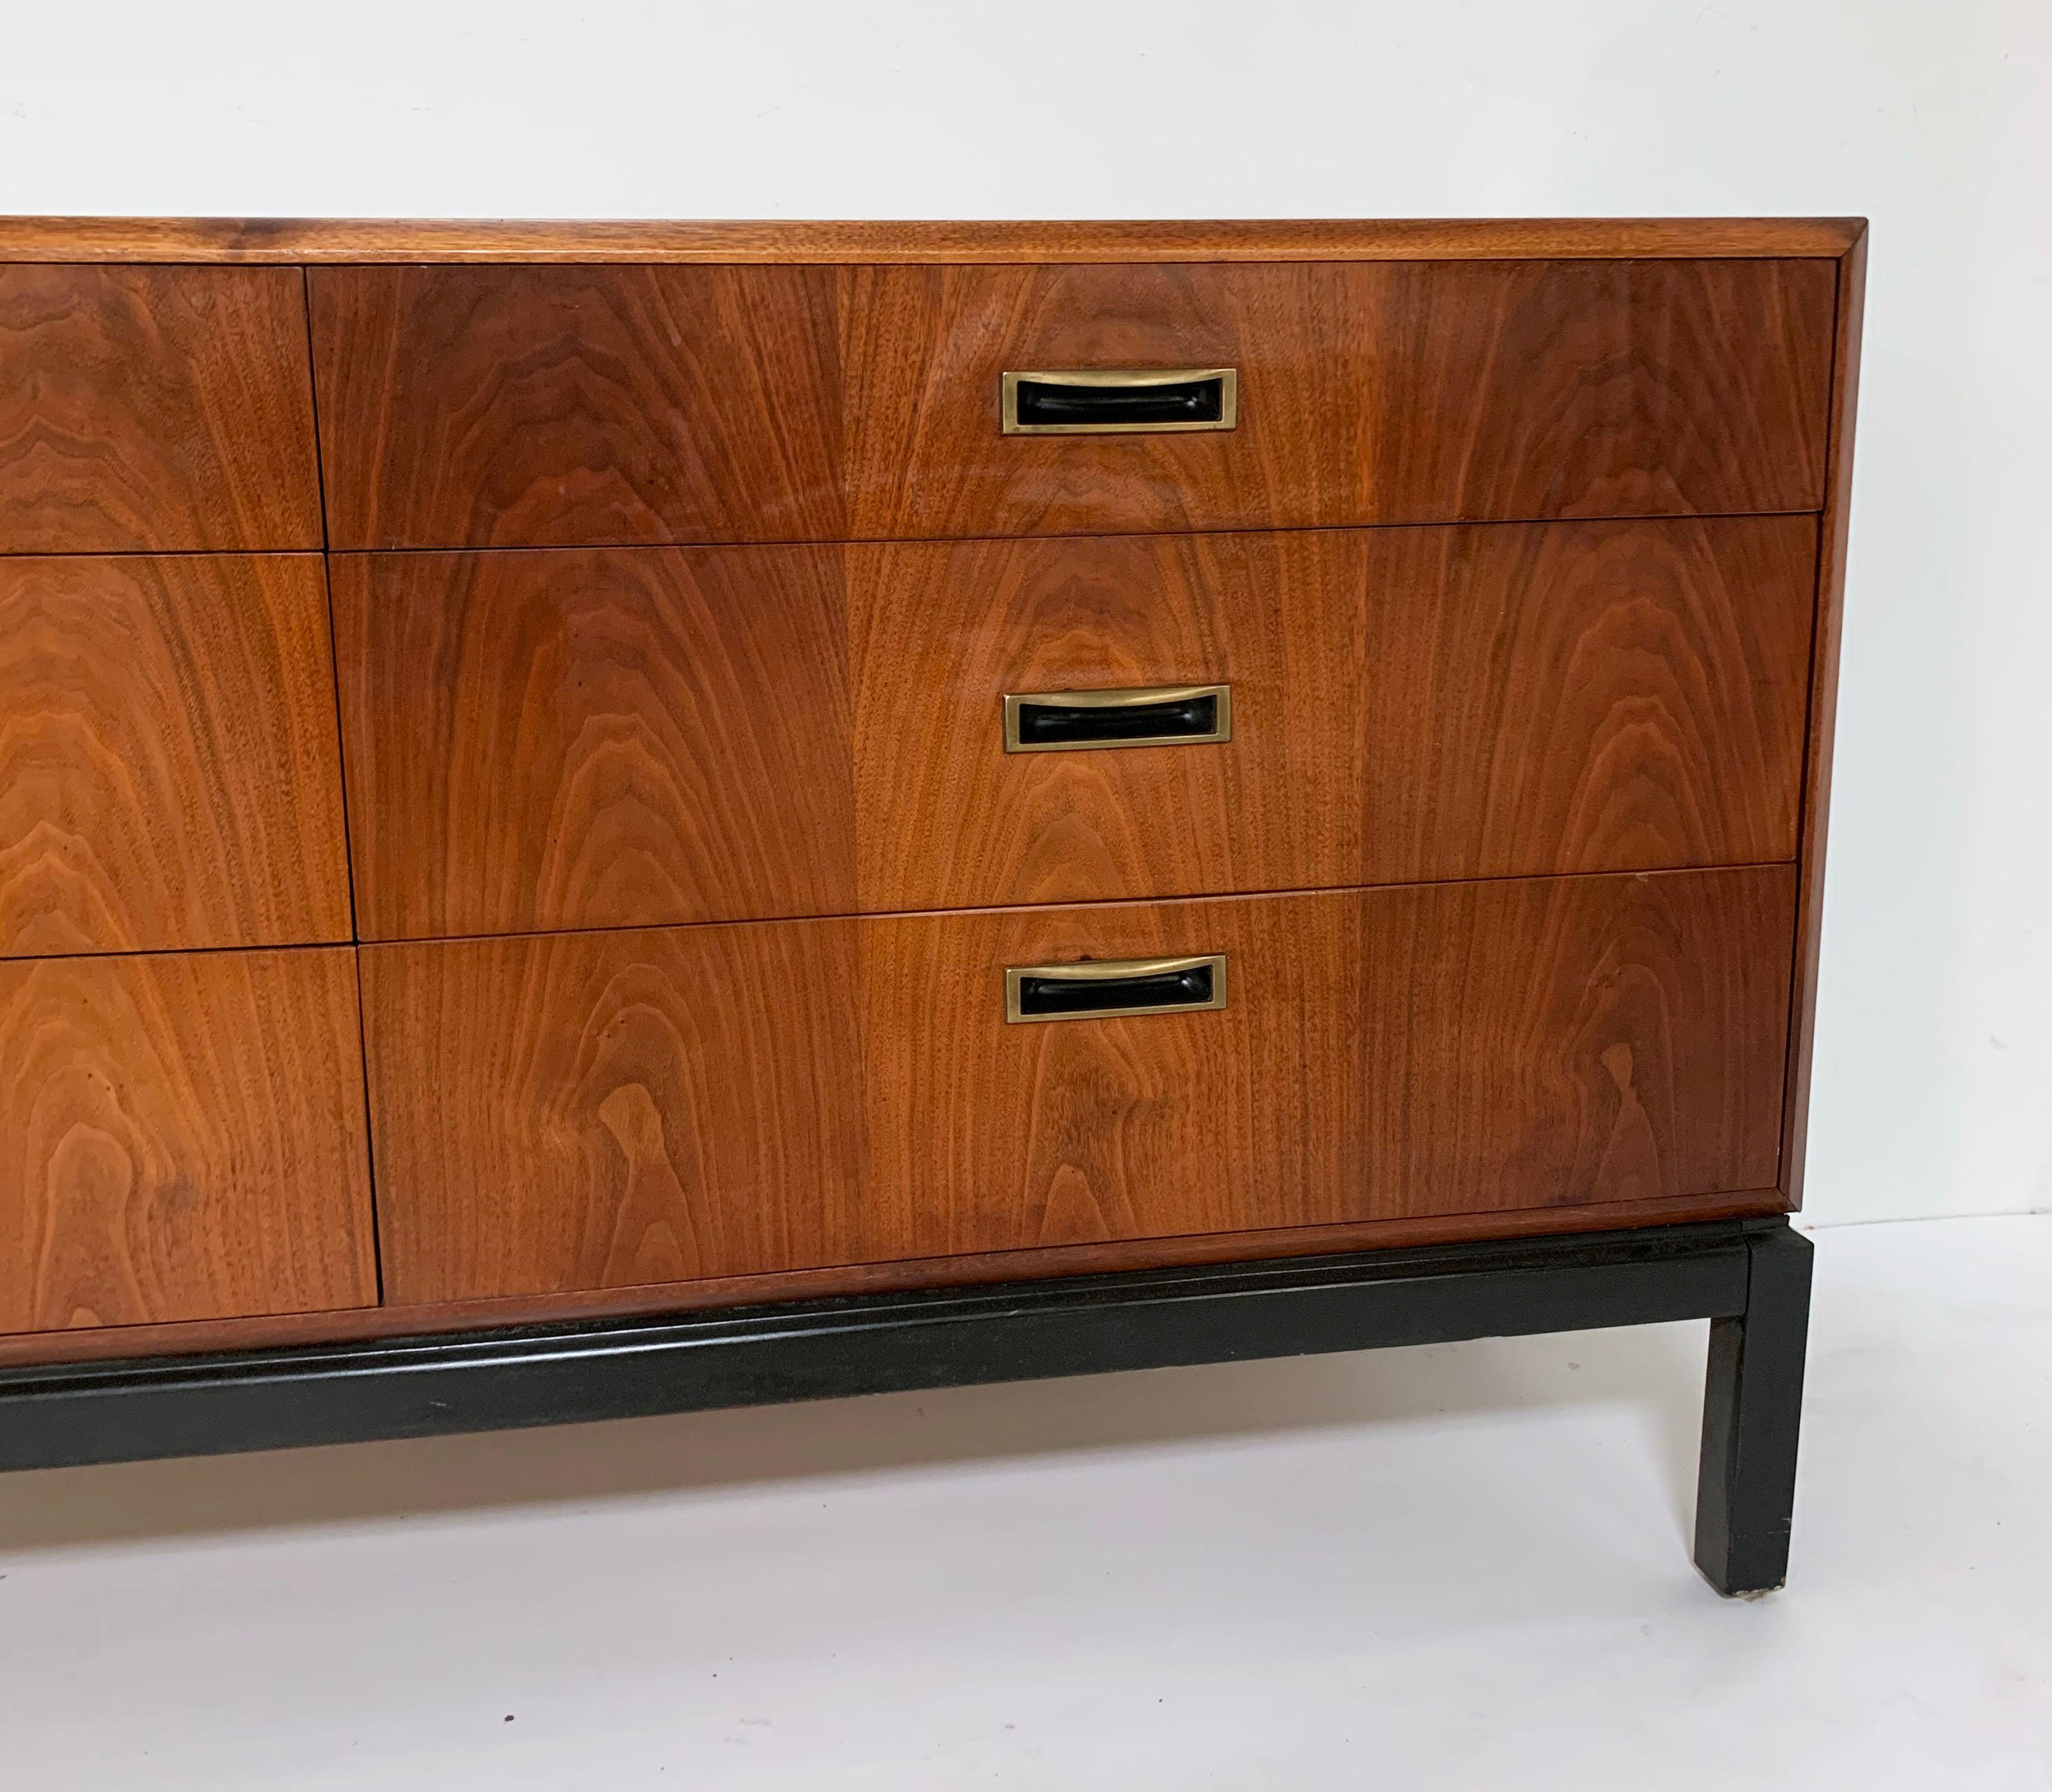 Mid-Century Modern Midcentury Six-Drawer Walnut Dresser by Jack Cartwright for Founders circa 1970s